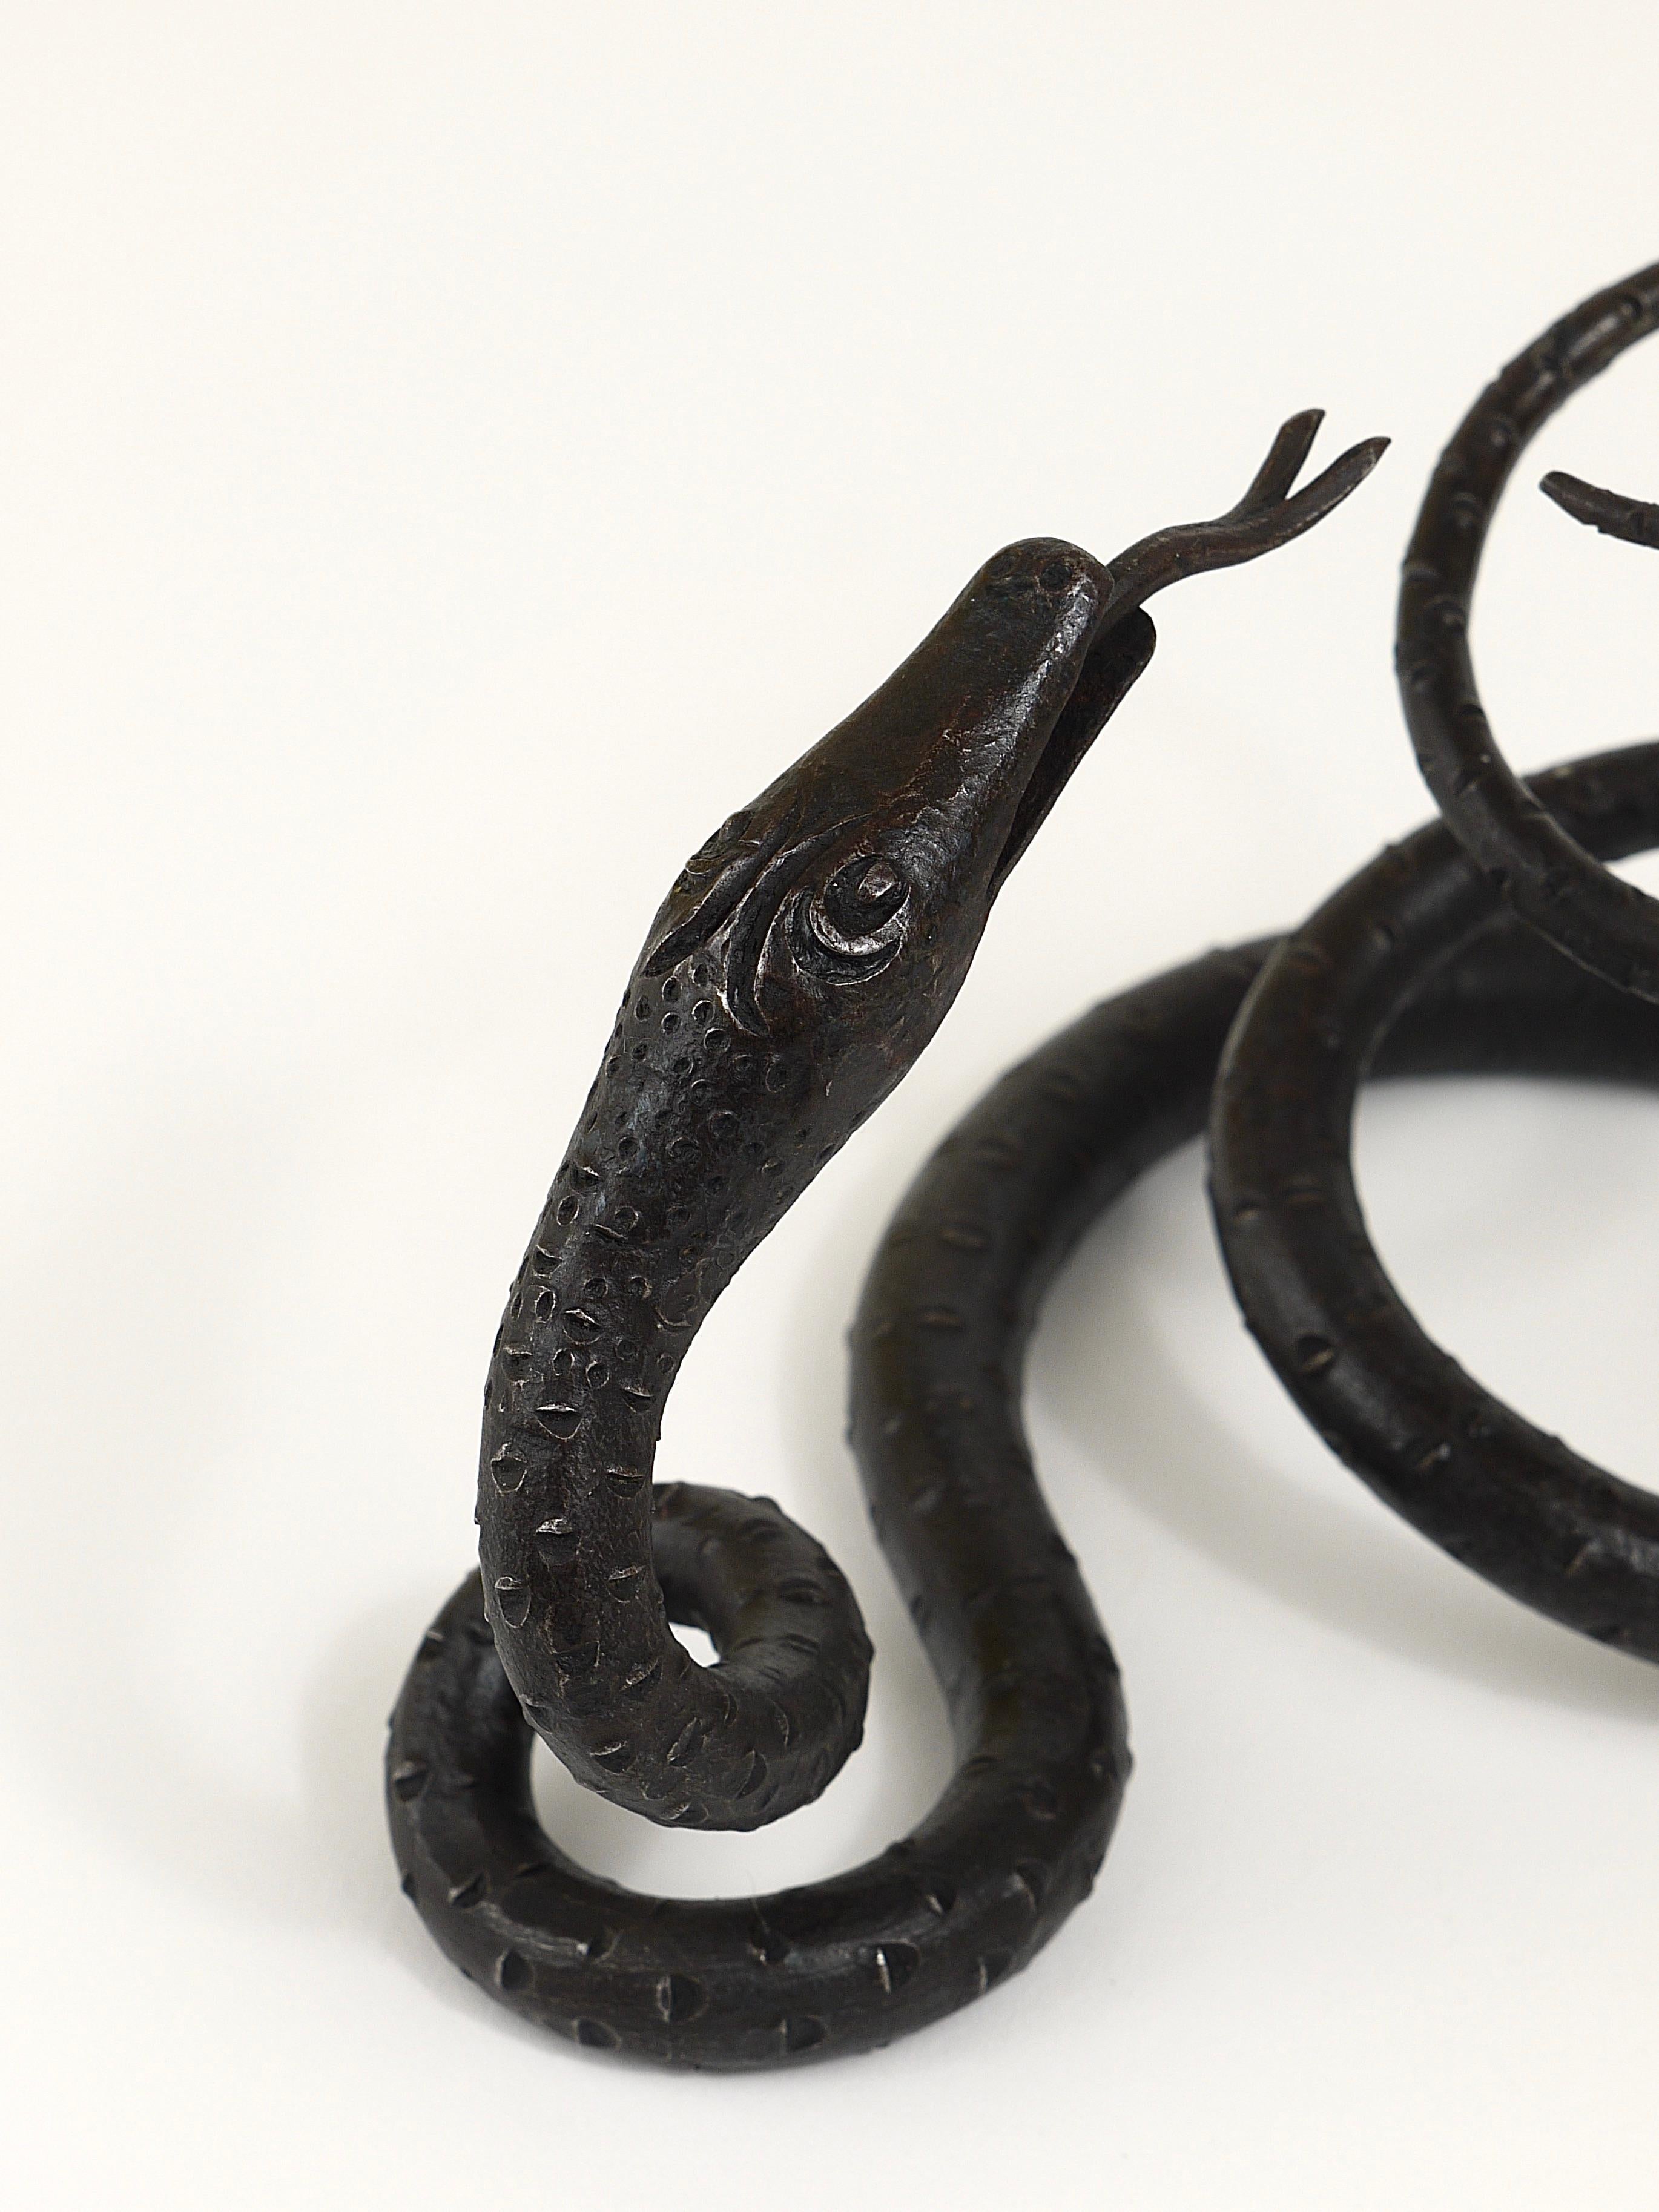 Edgar Brandt Style Hand Forged Iron Snake or Serpent Sculpture, Austria, 1920s For Sale 12